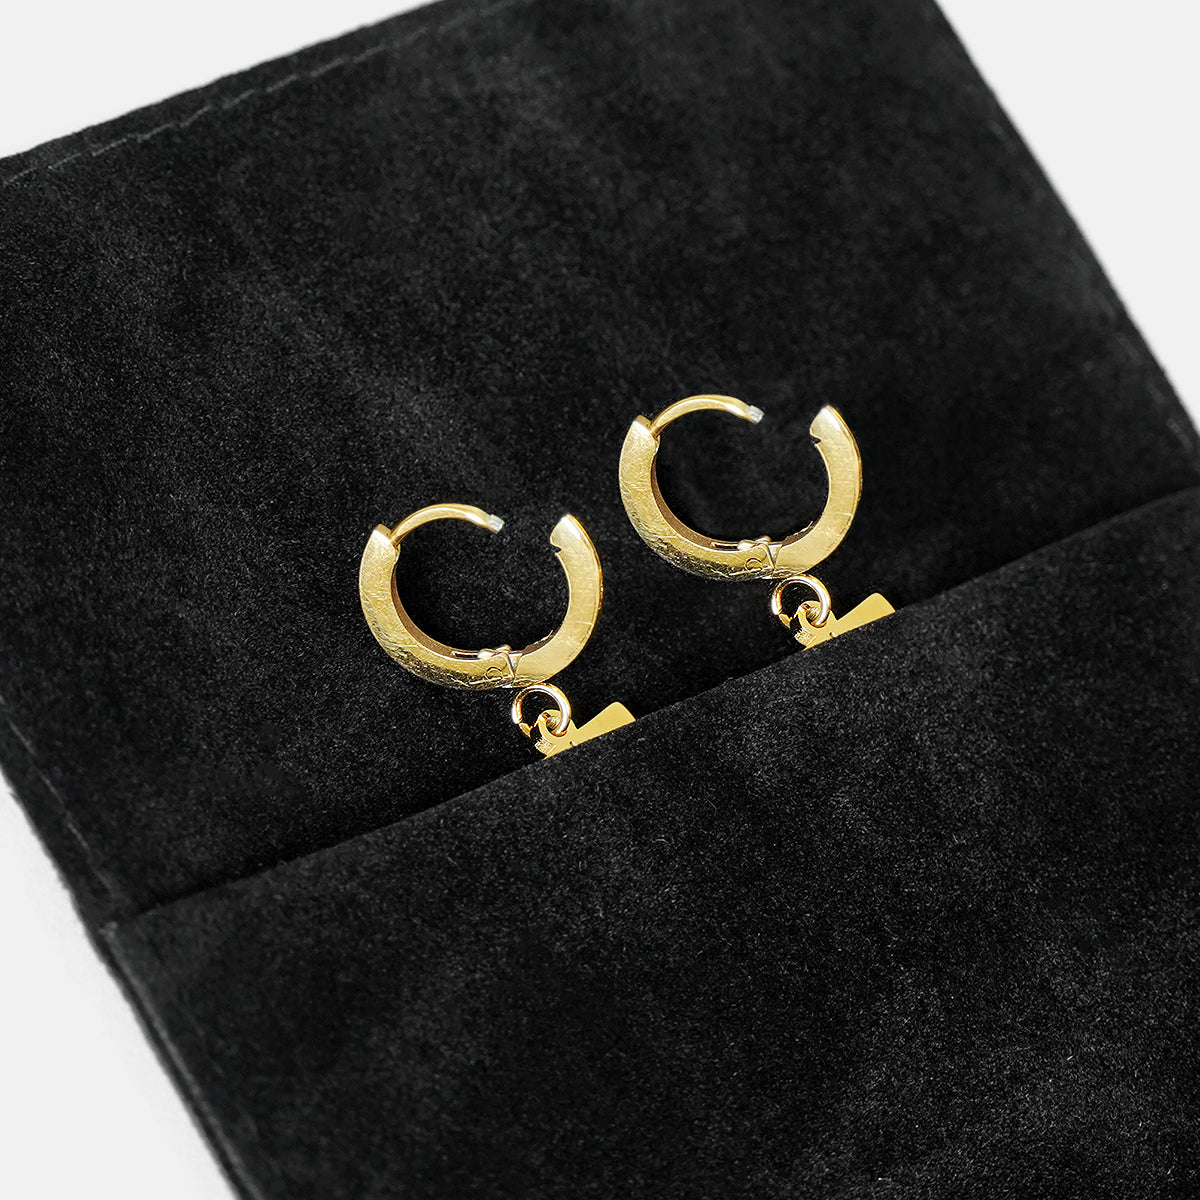 72 Number Earring - Gold Plated Stainless Steel